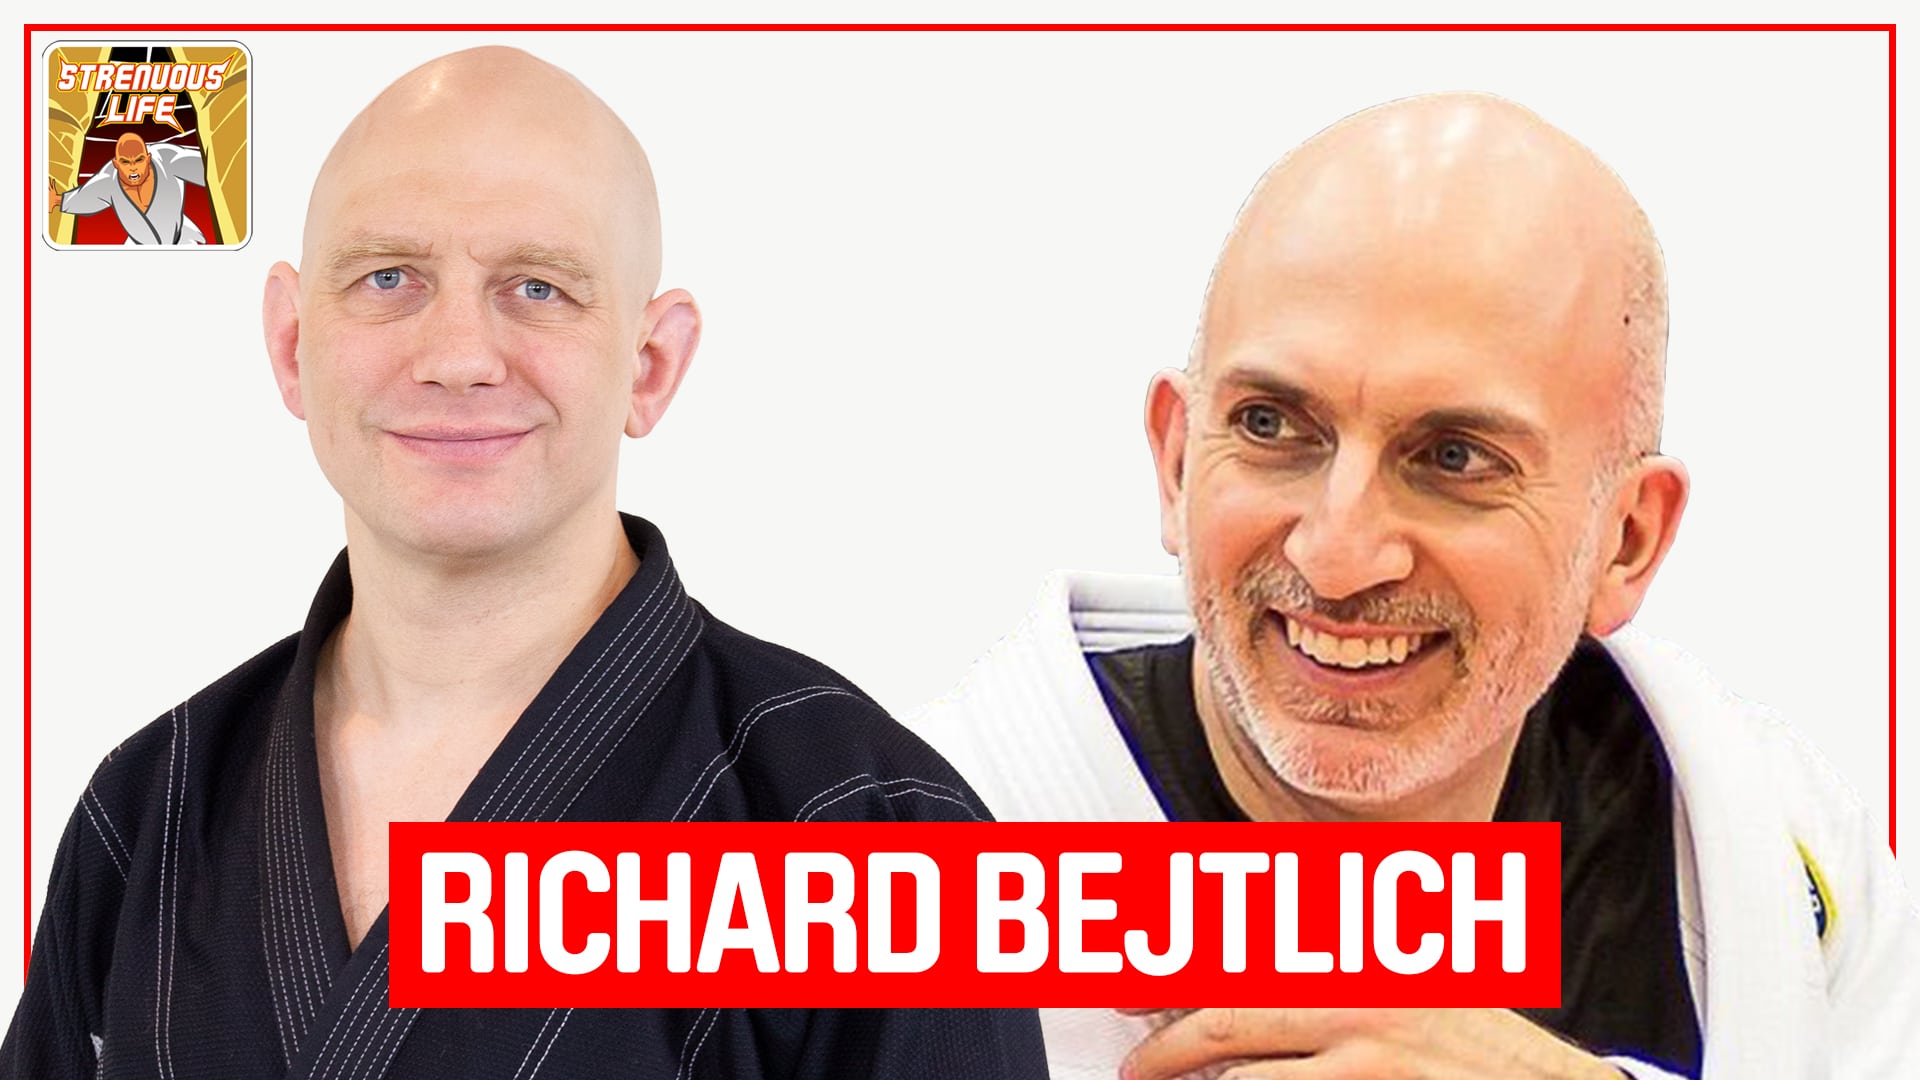 Richard Bejtlich on martial arts history and cybersecurity